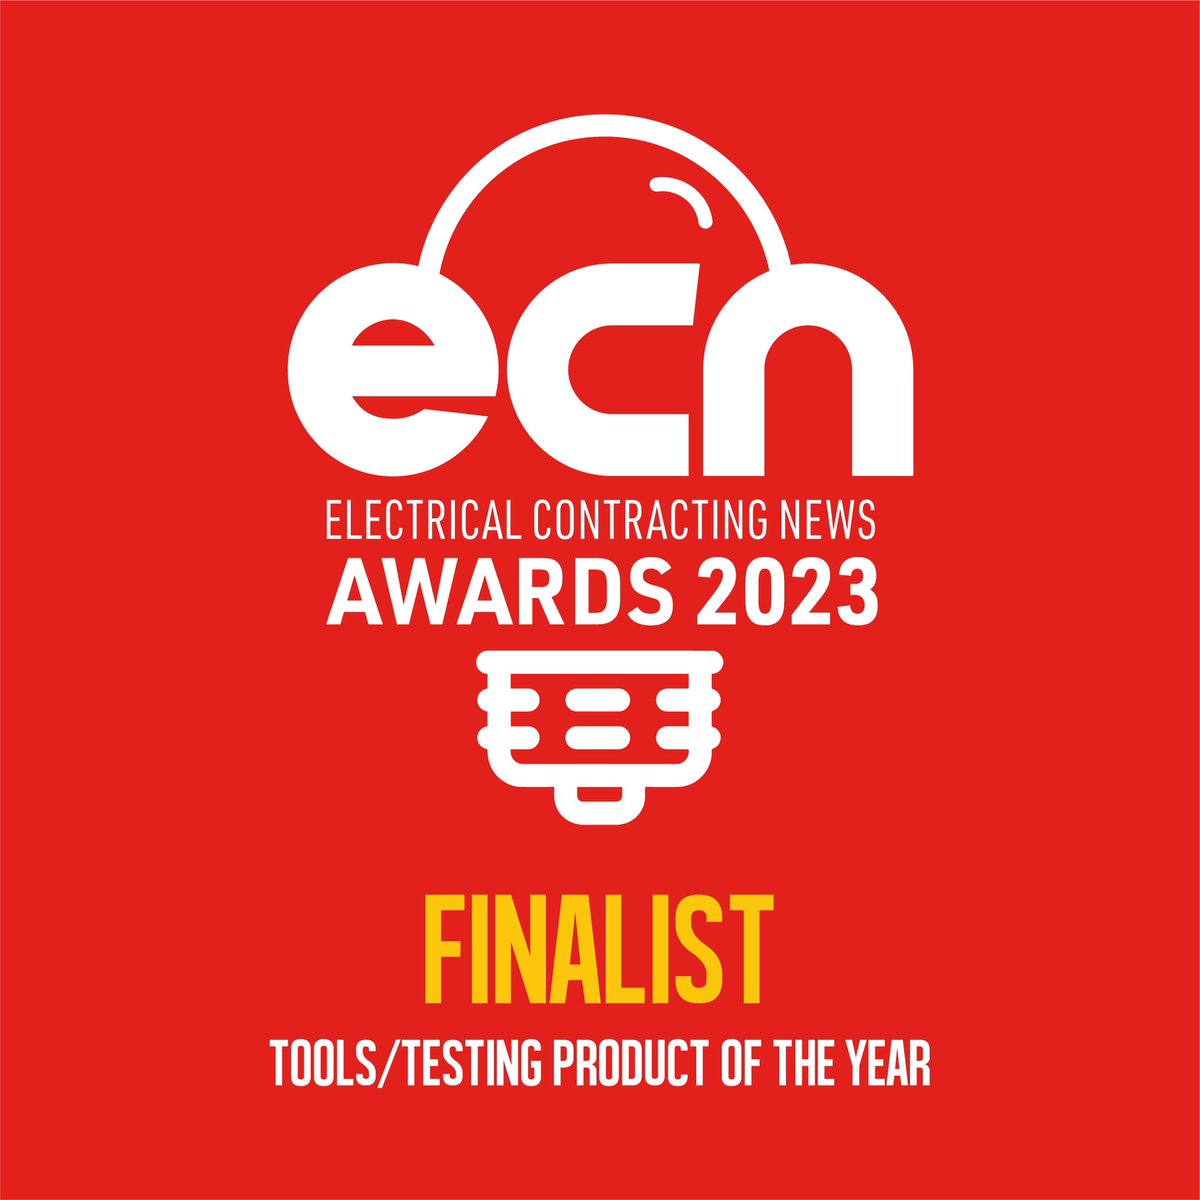 We are delighted to be nominated as a finalist for this years @ElecConNews awards.

Thank you to the panel for nominating us, we look forward to the awards on the 30th of November.

#awards #finalist #testequipment #tester #thankyou